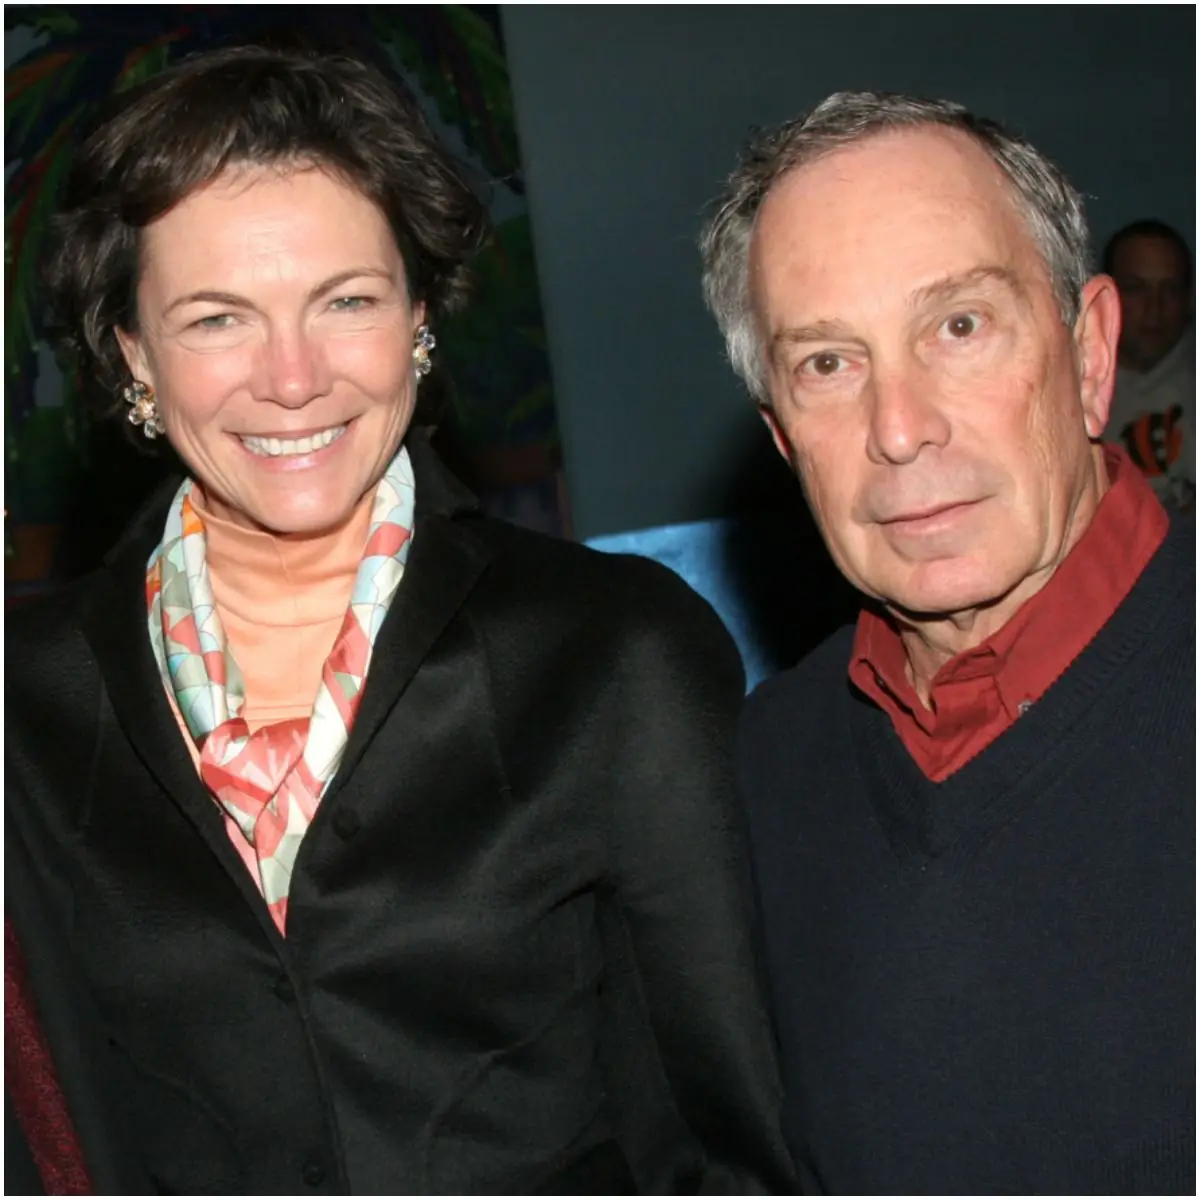 Diana Taylor and her boyfriend Mike Bloomberg